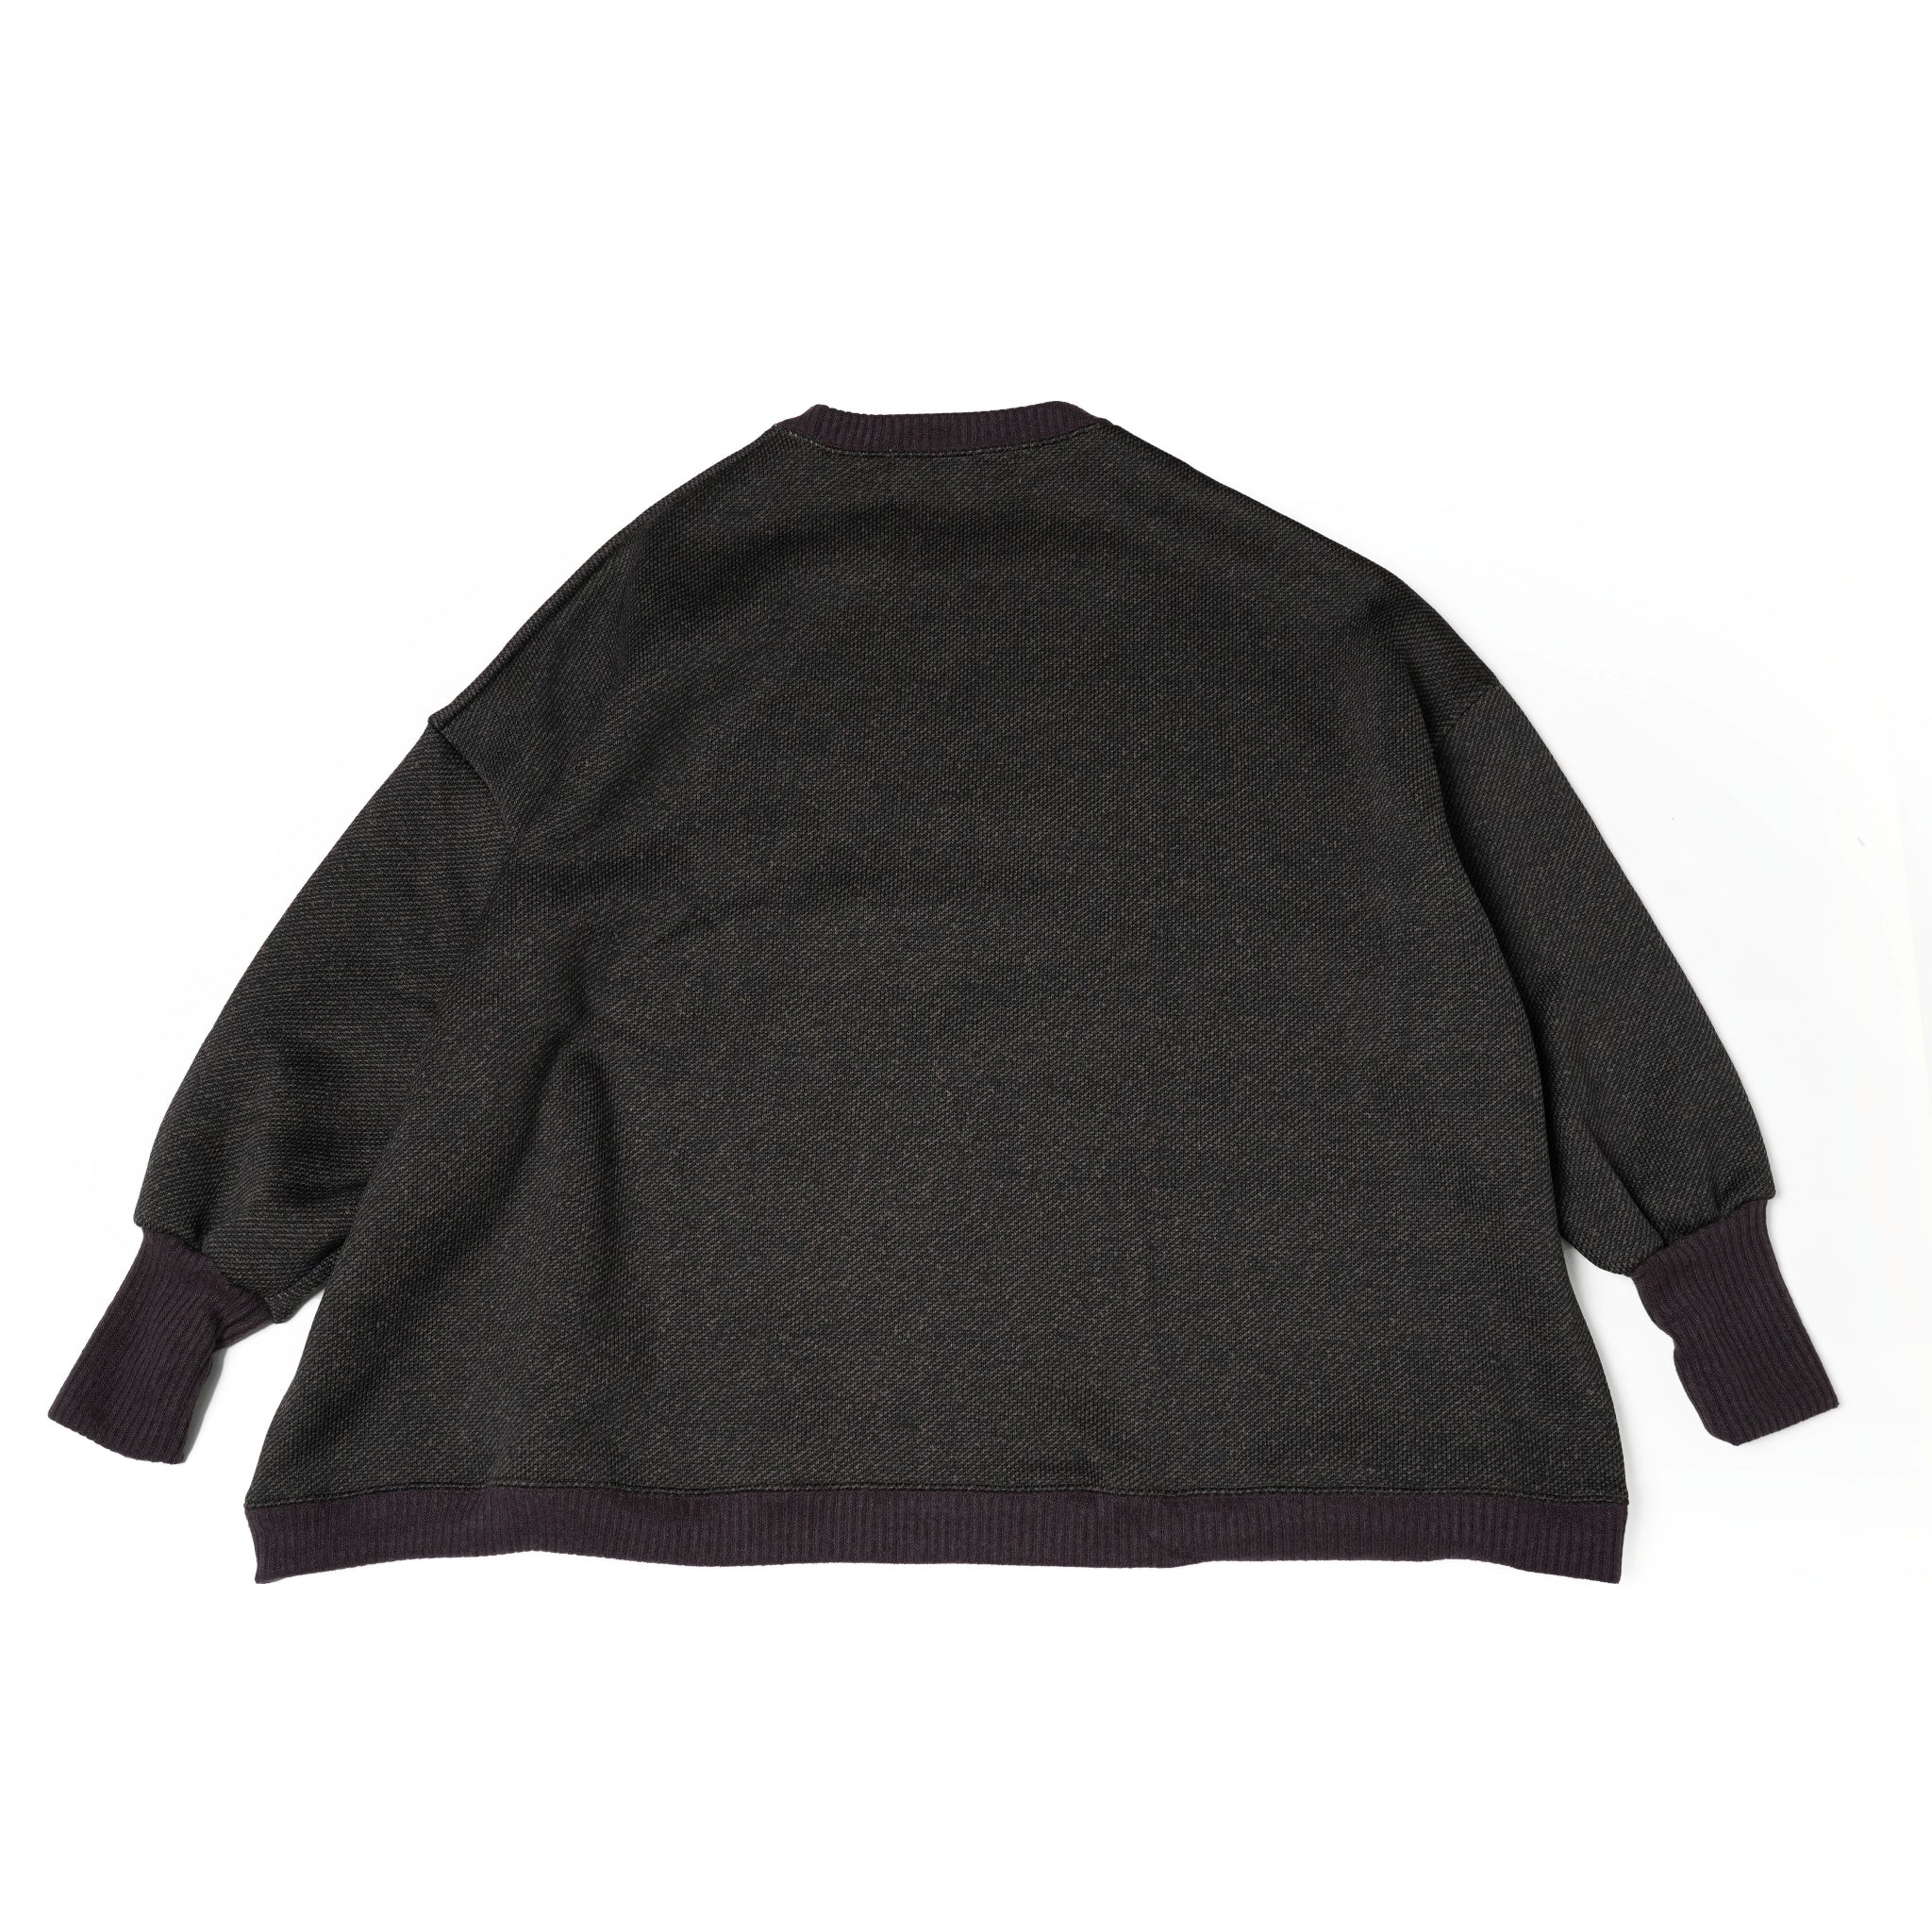 No:bsd23AW-28Ca | Name:Home Sweater Pullover/EUZEEN | Color:Brown